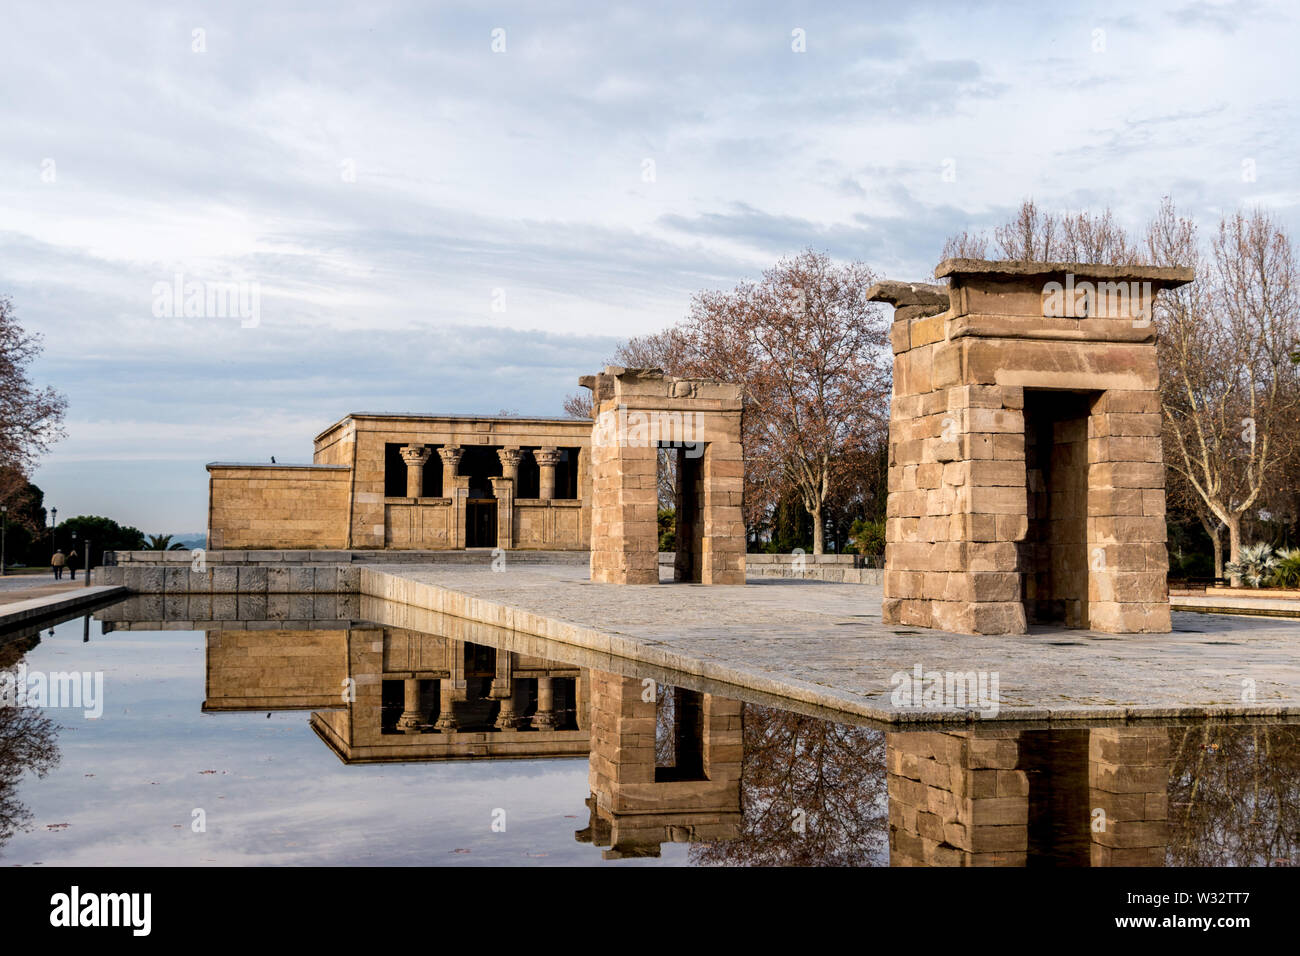 The Temple of Debod is an ancient Egyptian temple that was dismantled and rebuilt in Madrid, Spain. Stock Photo